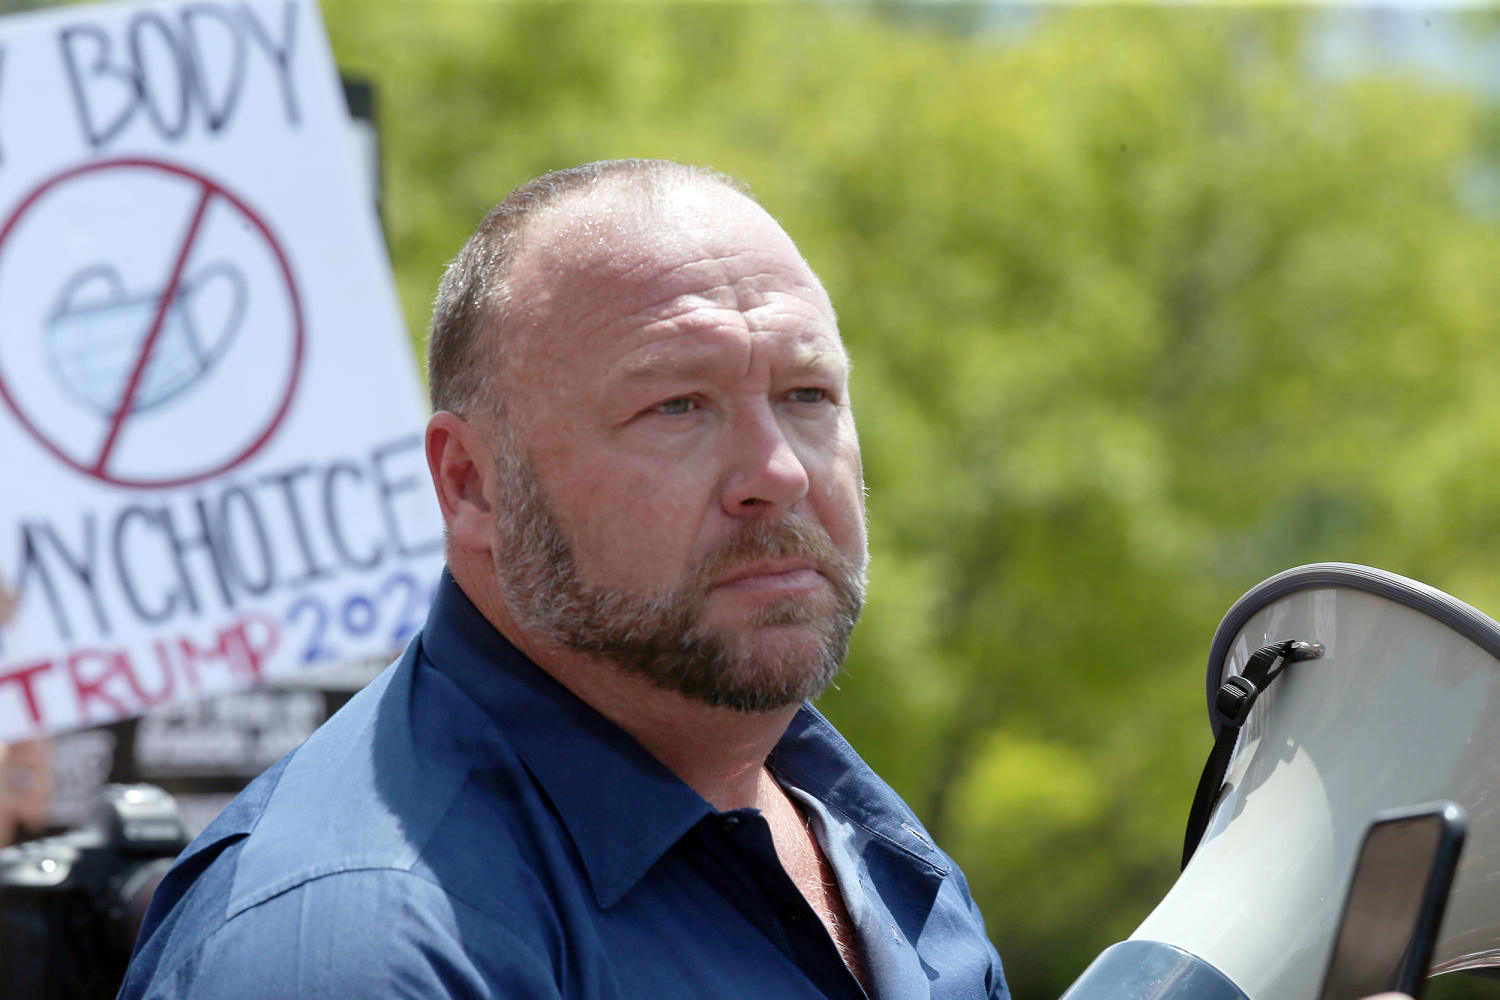 Alex Jones' bankruptcy for media company dismissed, but judge rules he can liquidate personal assets